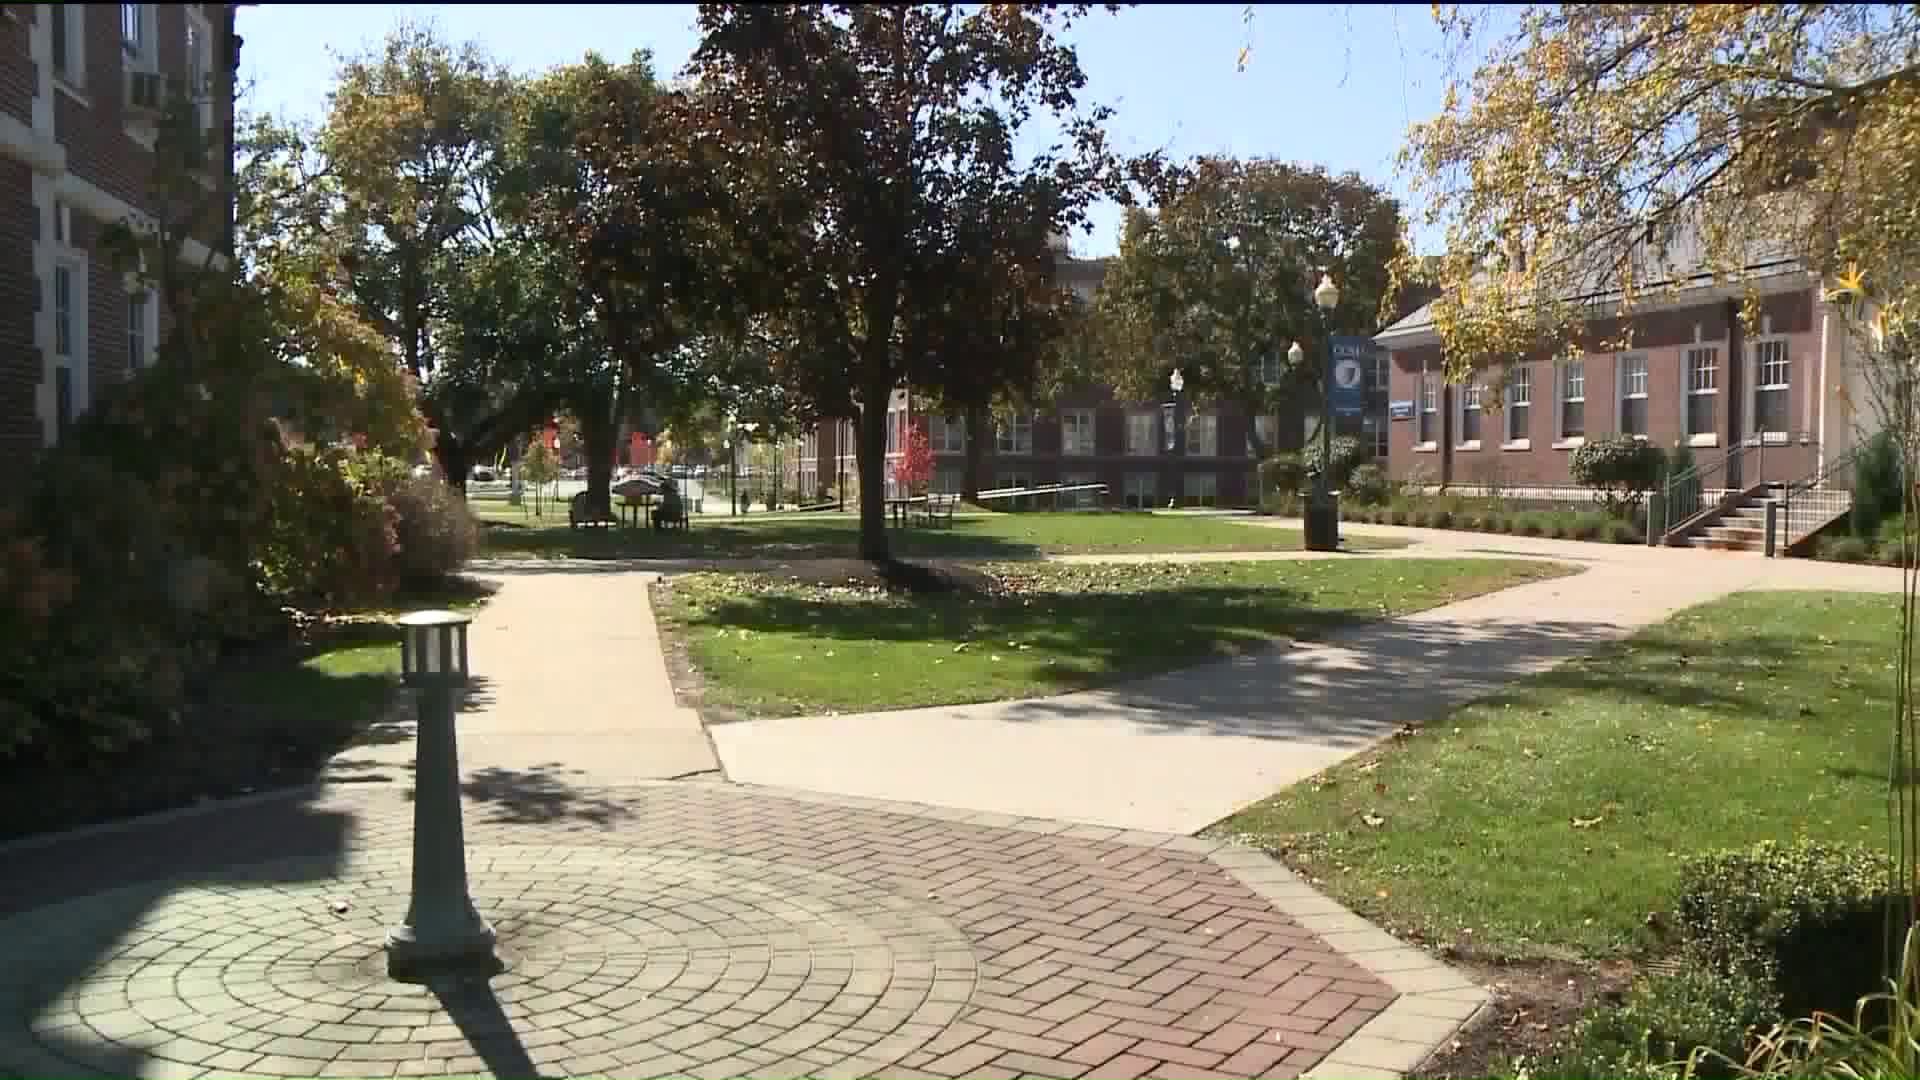 Changes and transparency surrounding sexual misconduct at CCSU